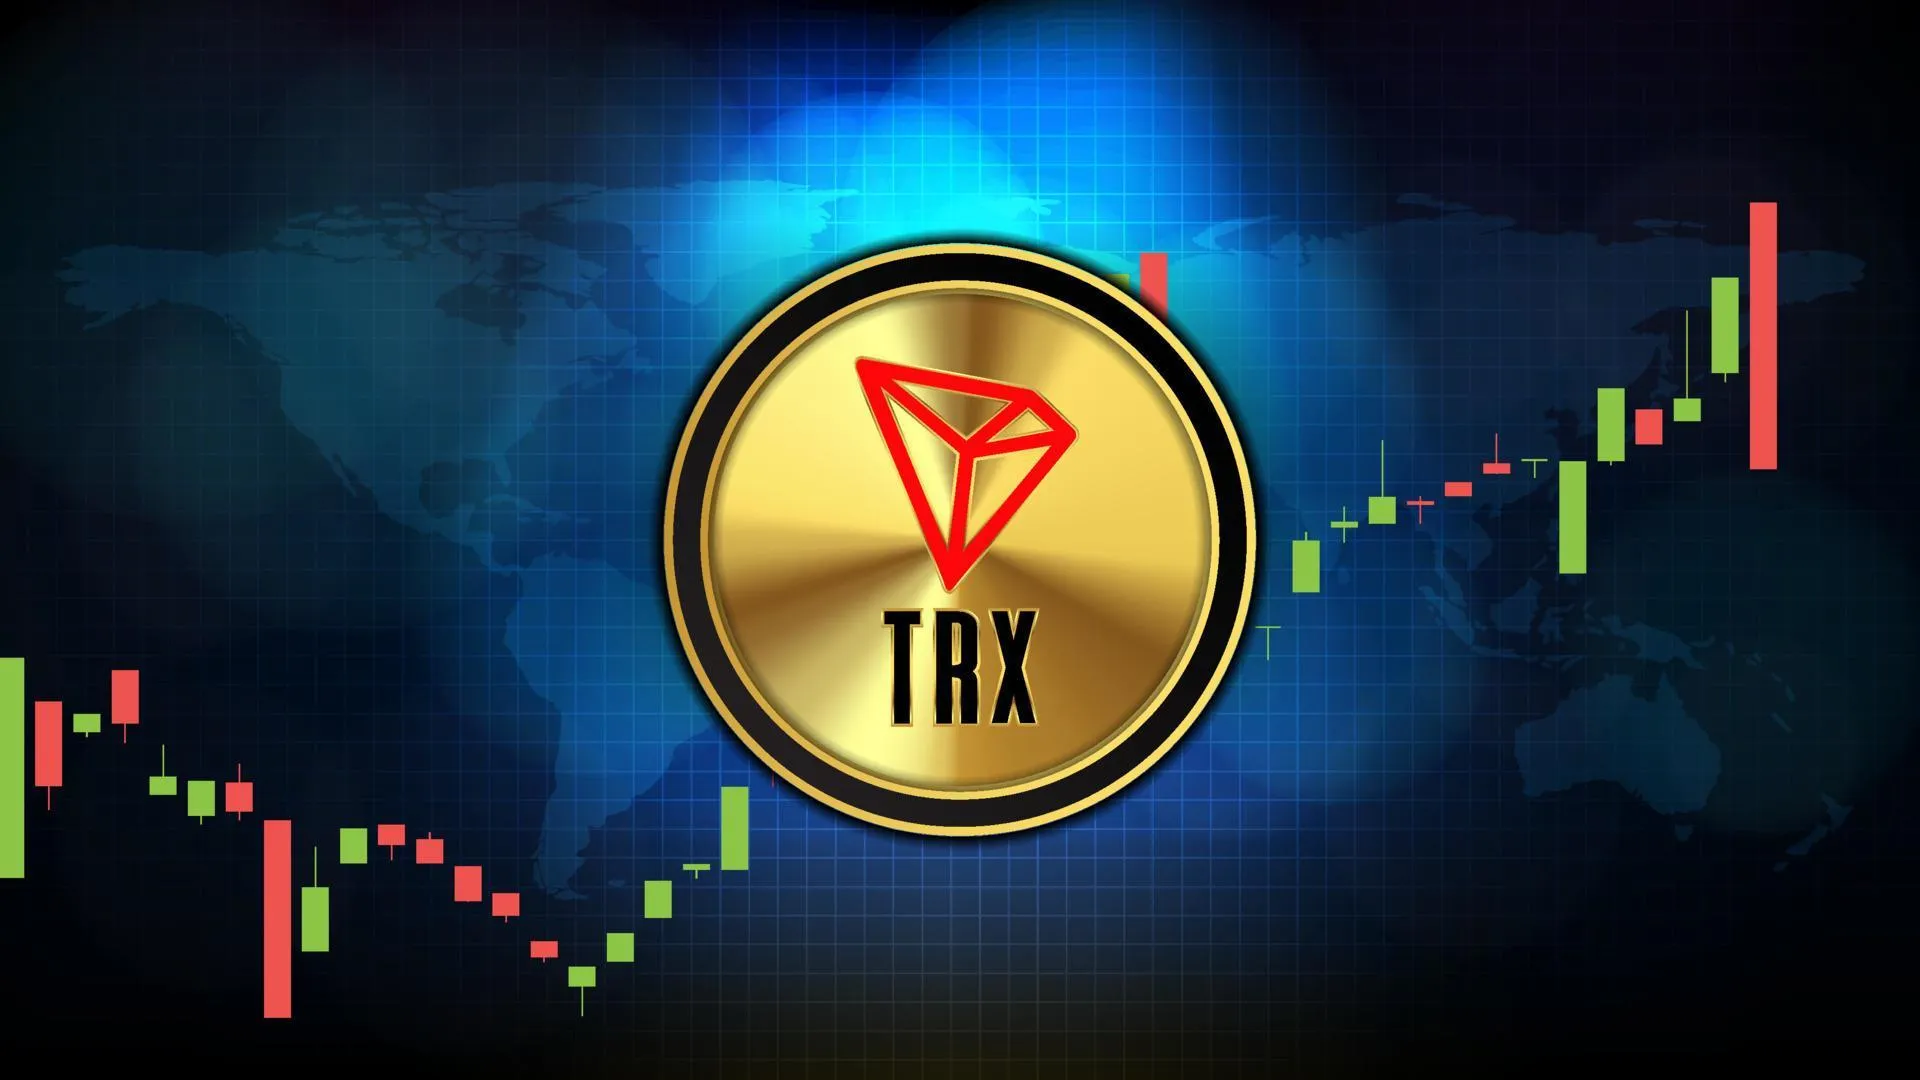 Traders Lookout for These Entry Levels as Tron(TRX) Price Poised for A 5x Rally to Hit $0.2 Soon!